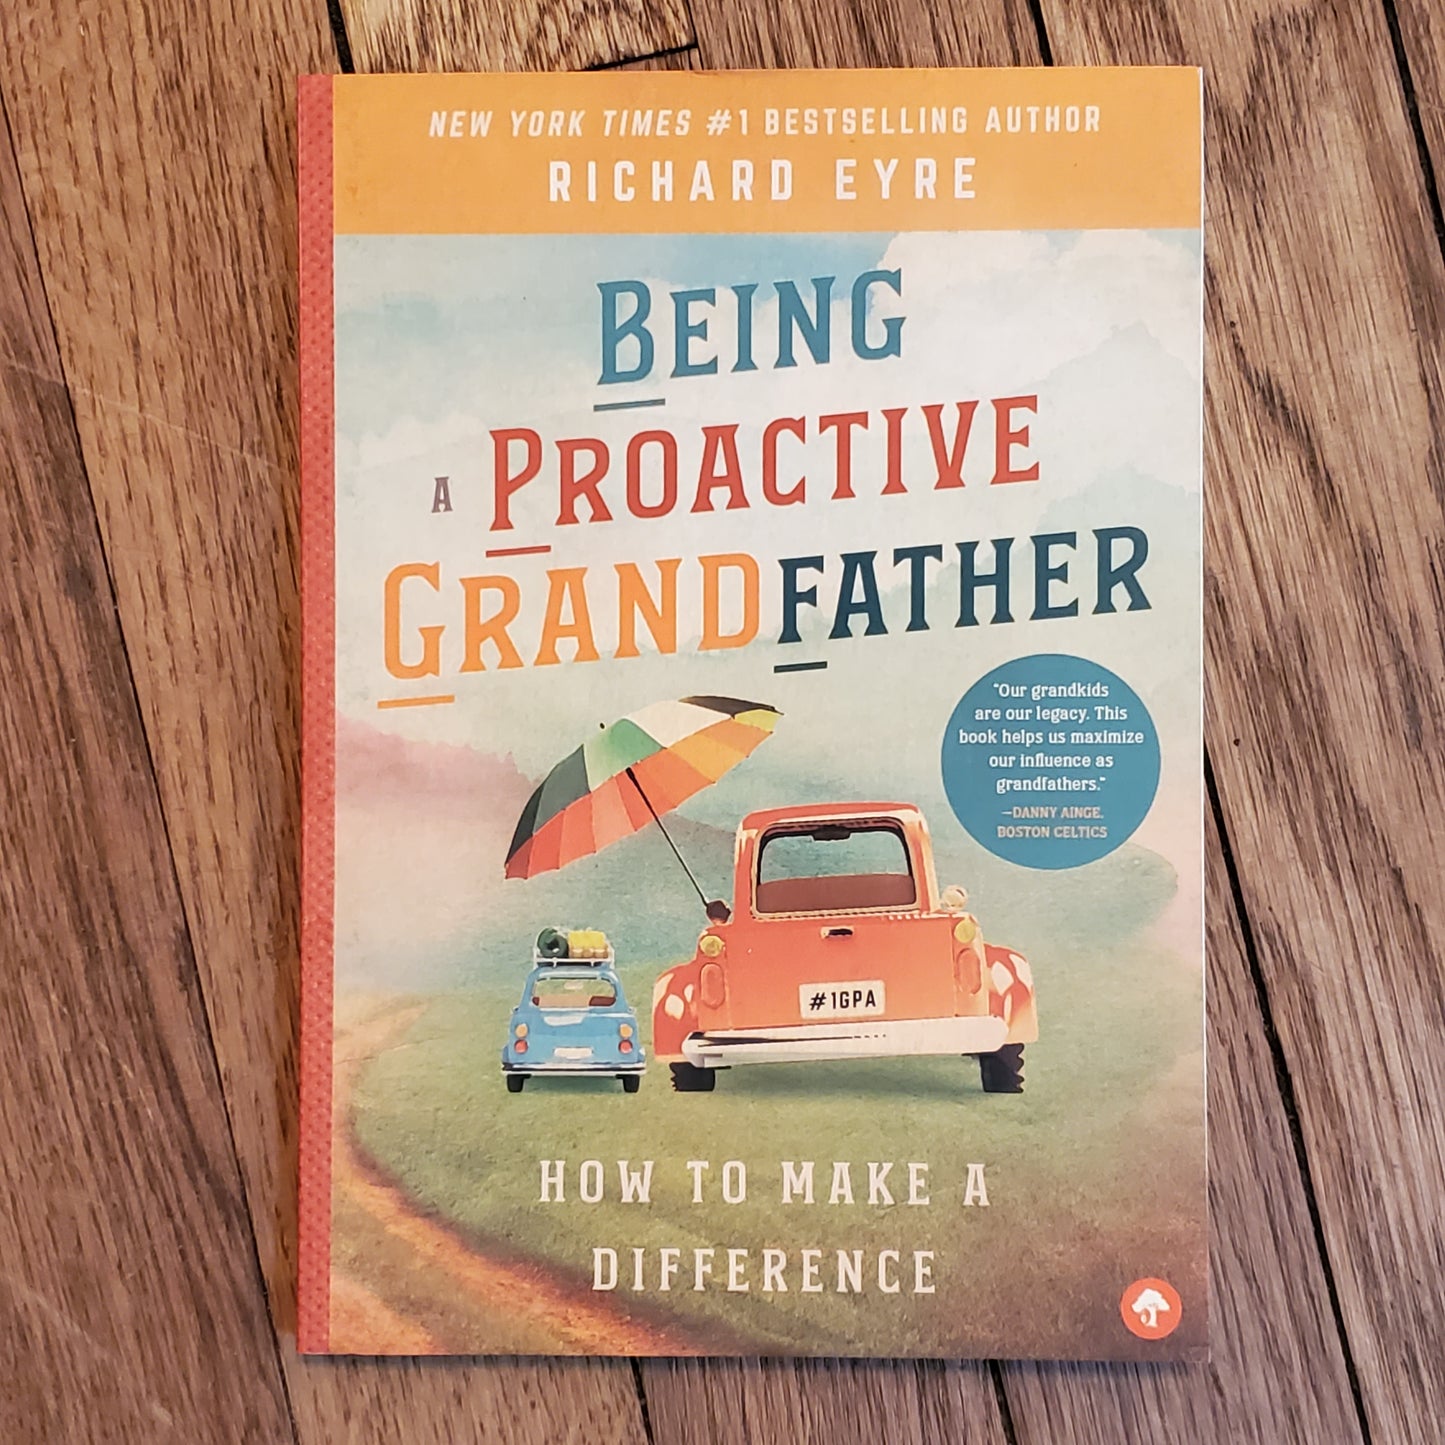 Being a Proactive Grandfather: How to Make a Difference